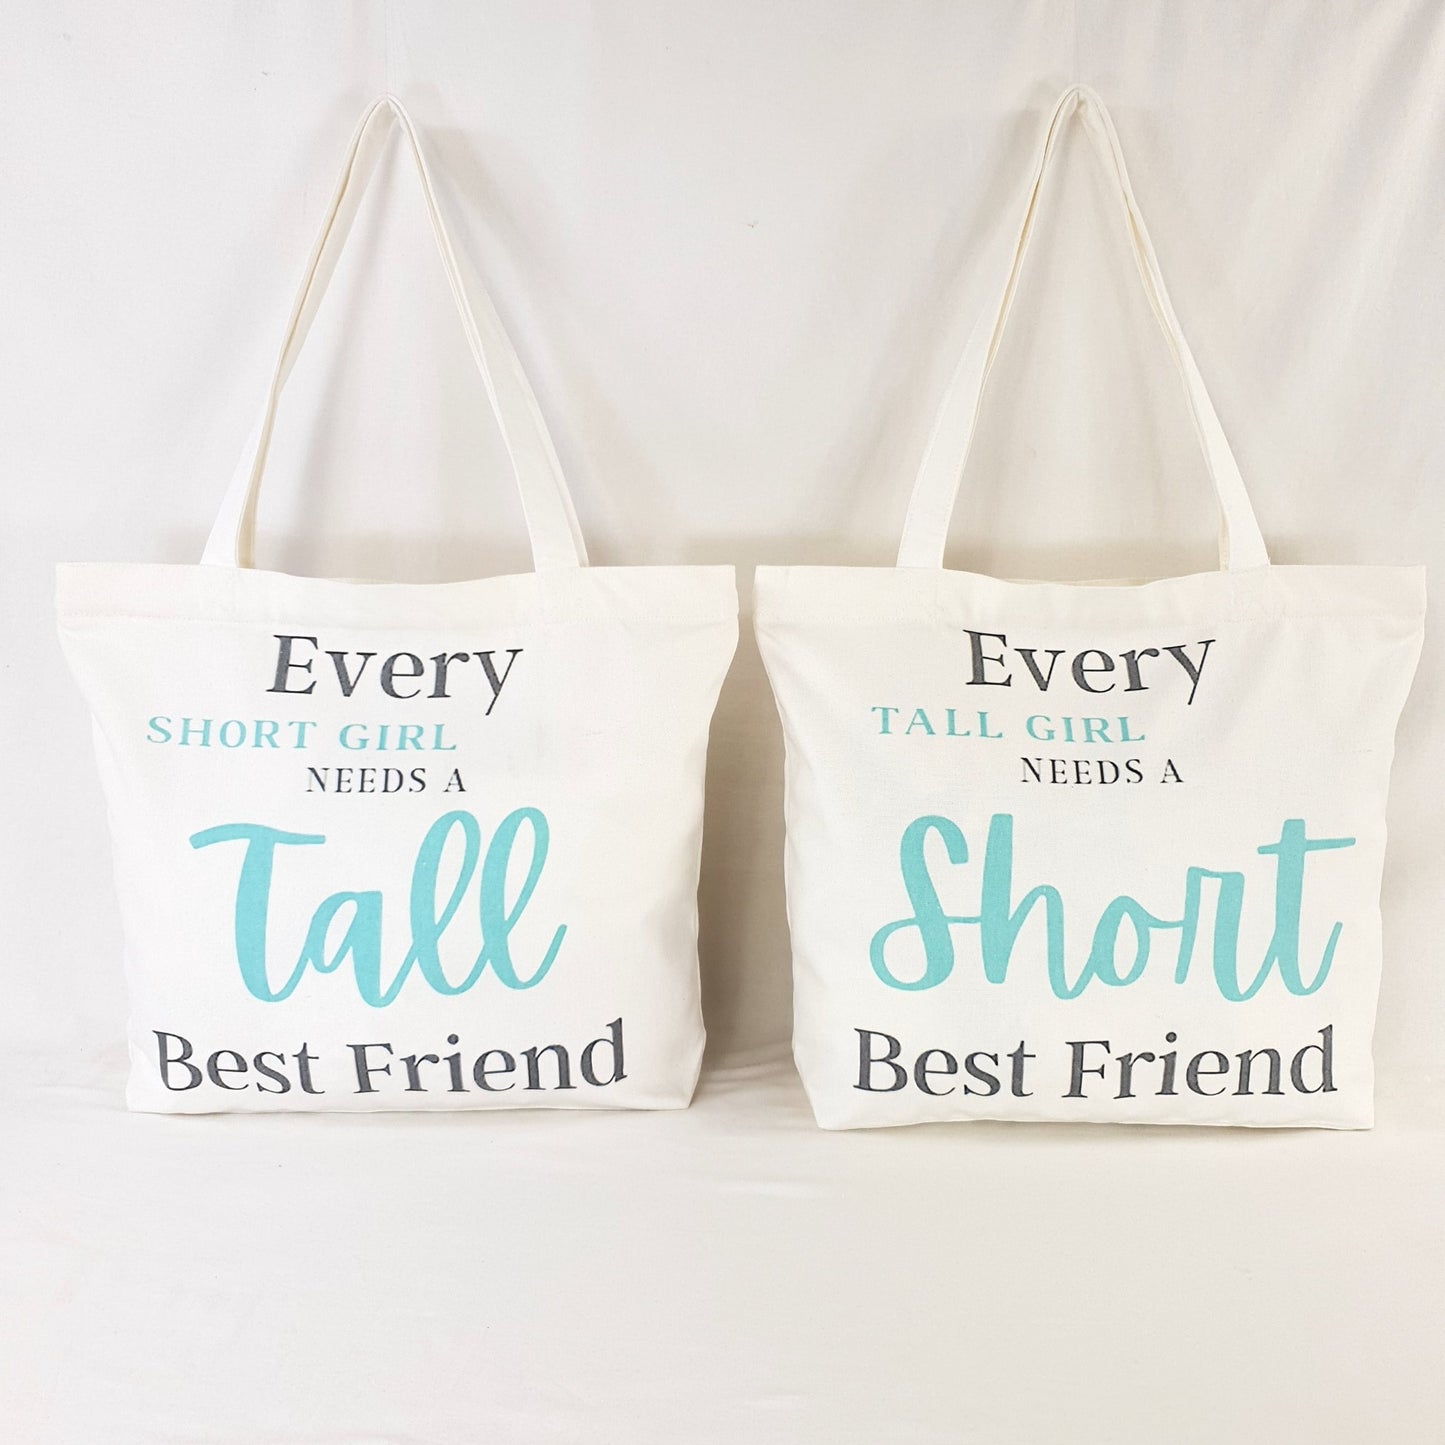 Tall Friend and Short Friend bags, one bag print text reads : "Every Short girl needs a tall best friend" and the words "short girl" and "Tall" is in Teal color and rest of writing is in dark grey. the other bag print reads: "Every tall girl needs a short best friend" colouring of the print text is the same as the other bag.  Bag itself is white with shoulder straps, zipper on the top